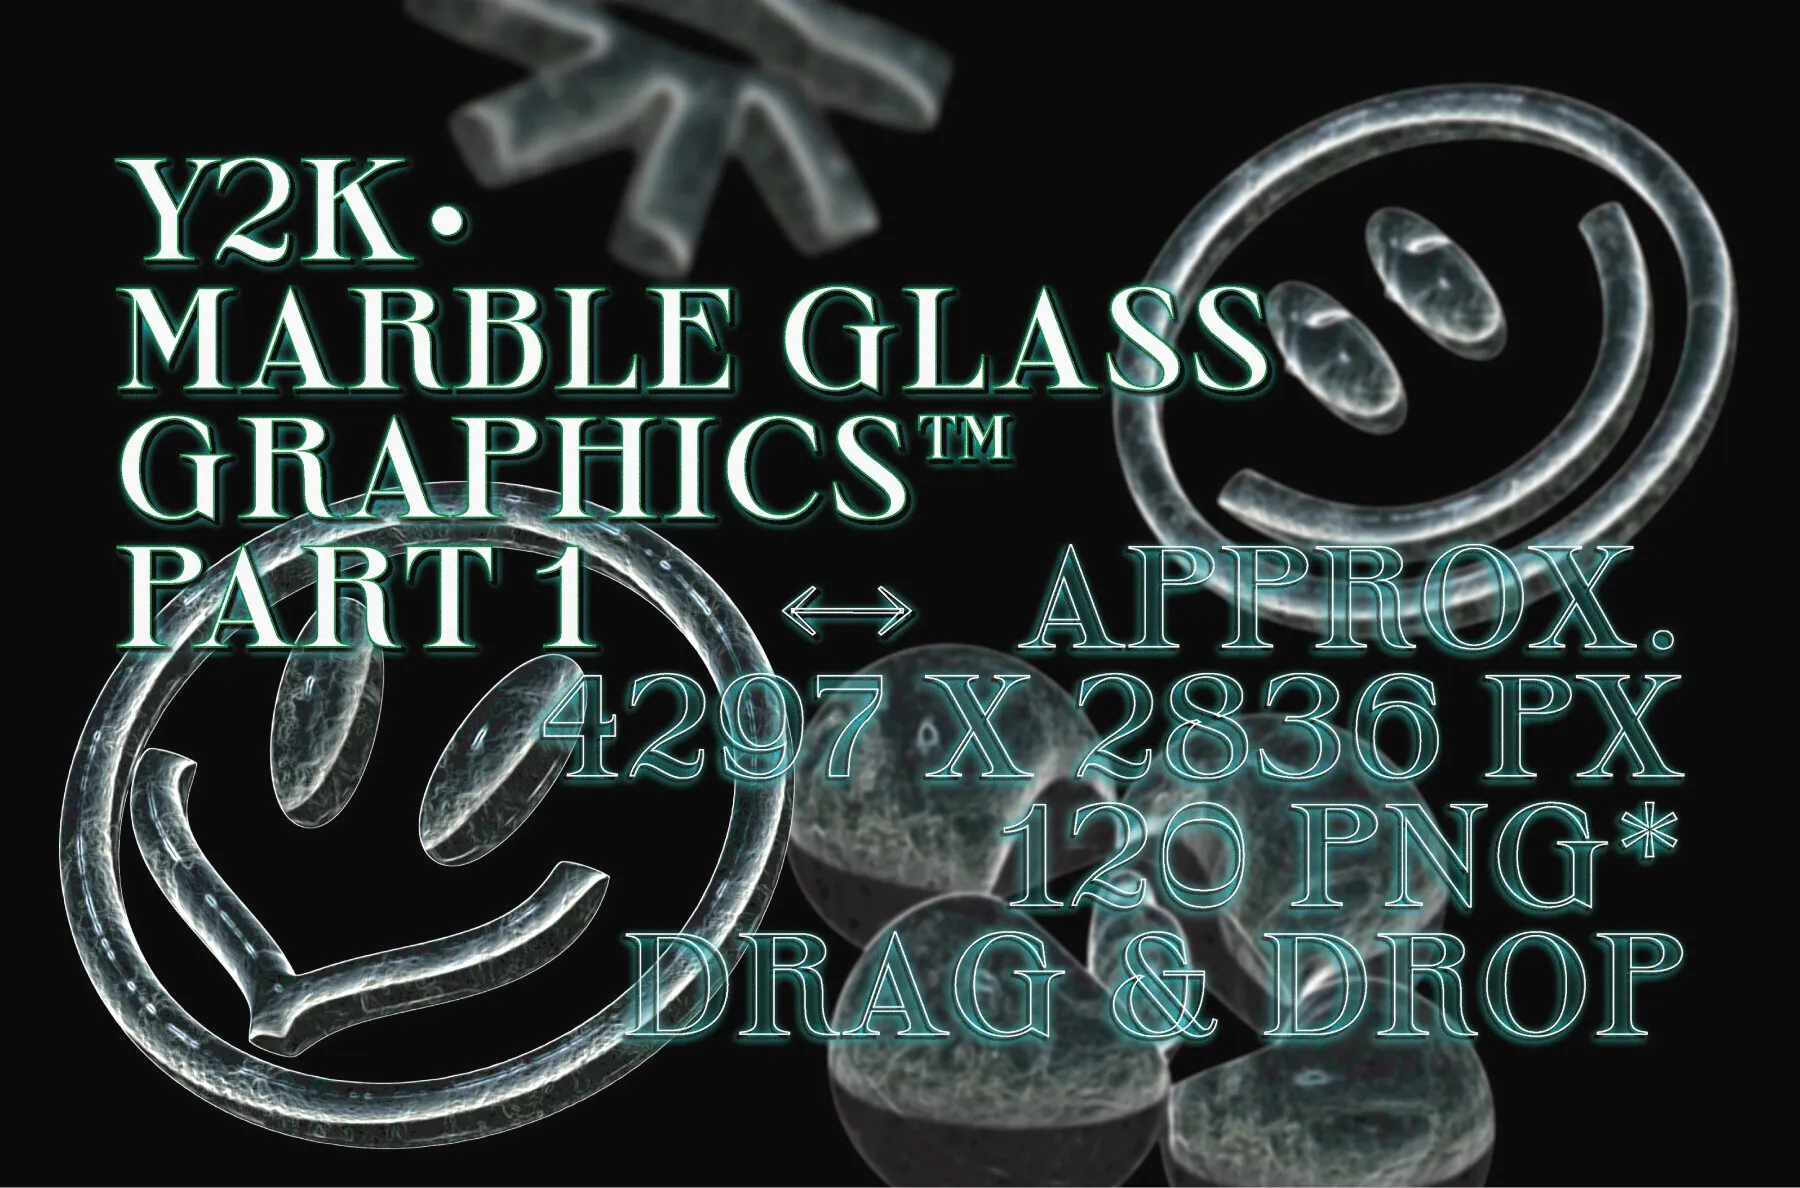 Y2K Marble Glass - Part 1